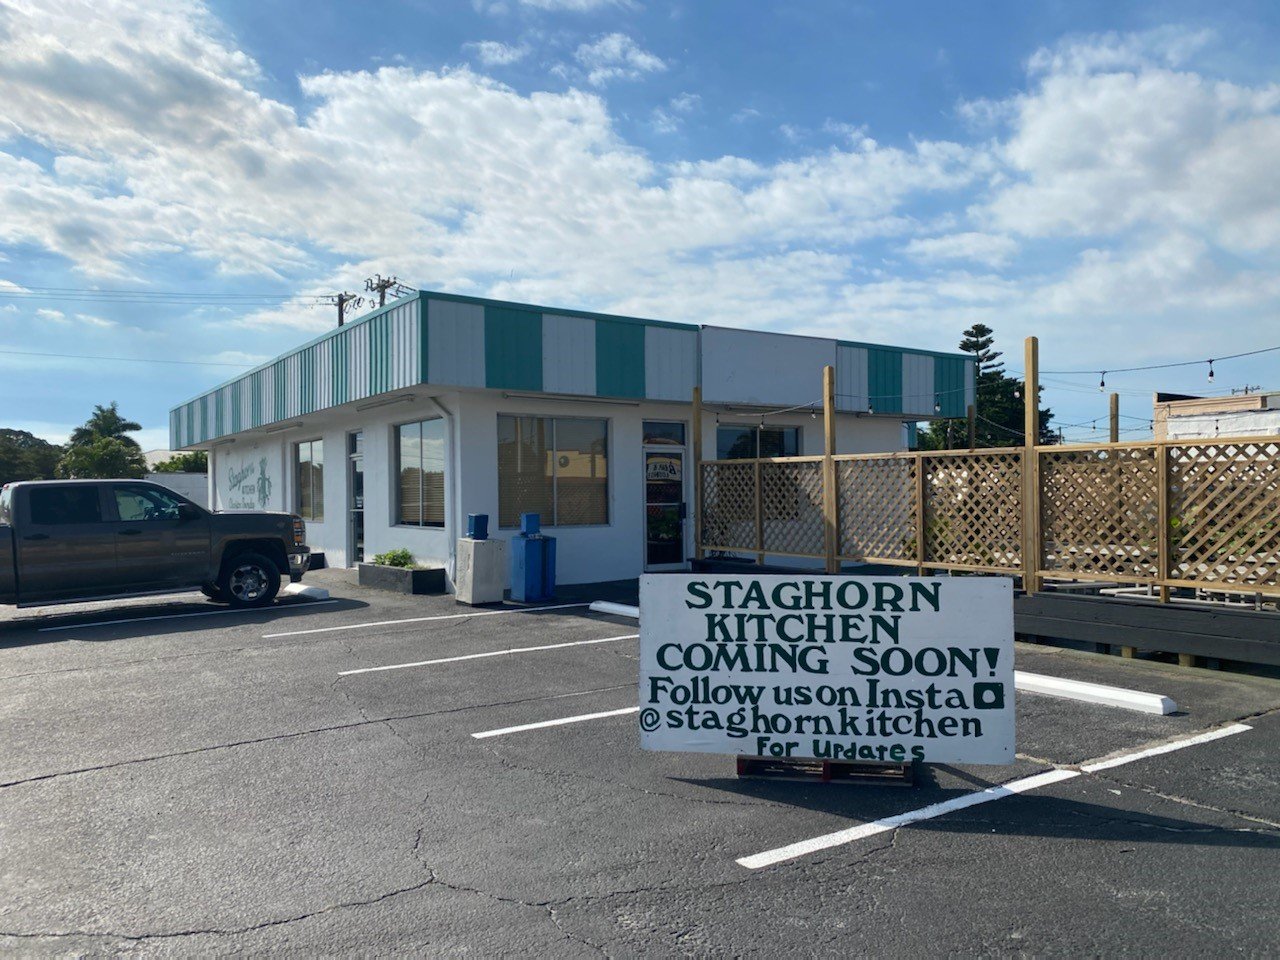 Staghorn Kitchen will open soon in Clewiston